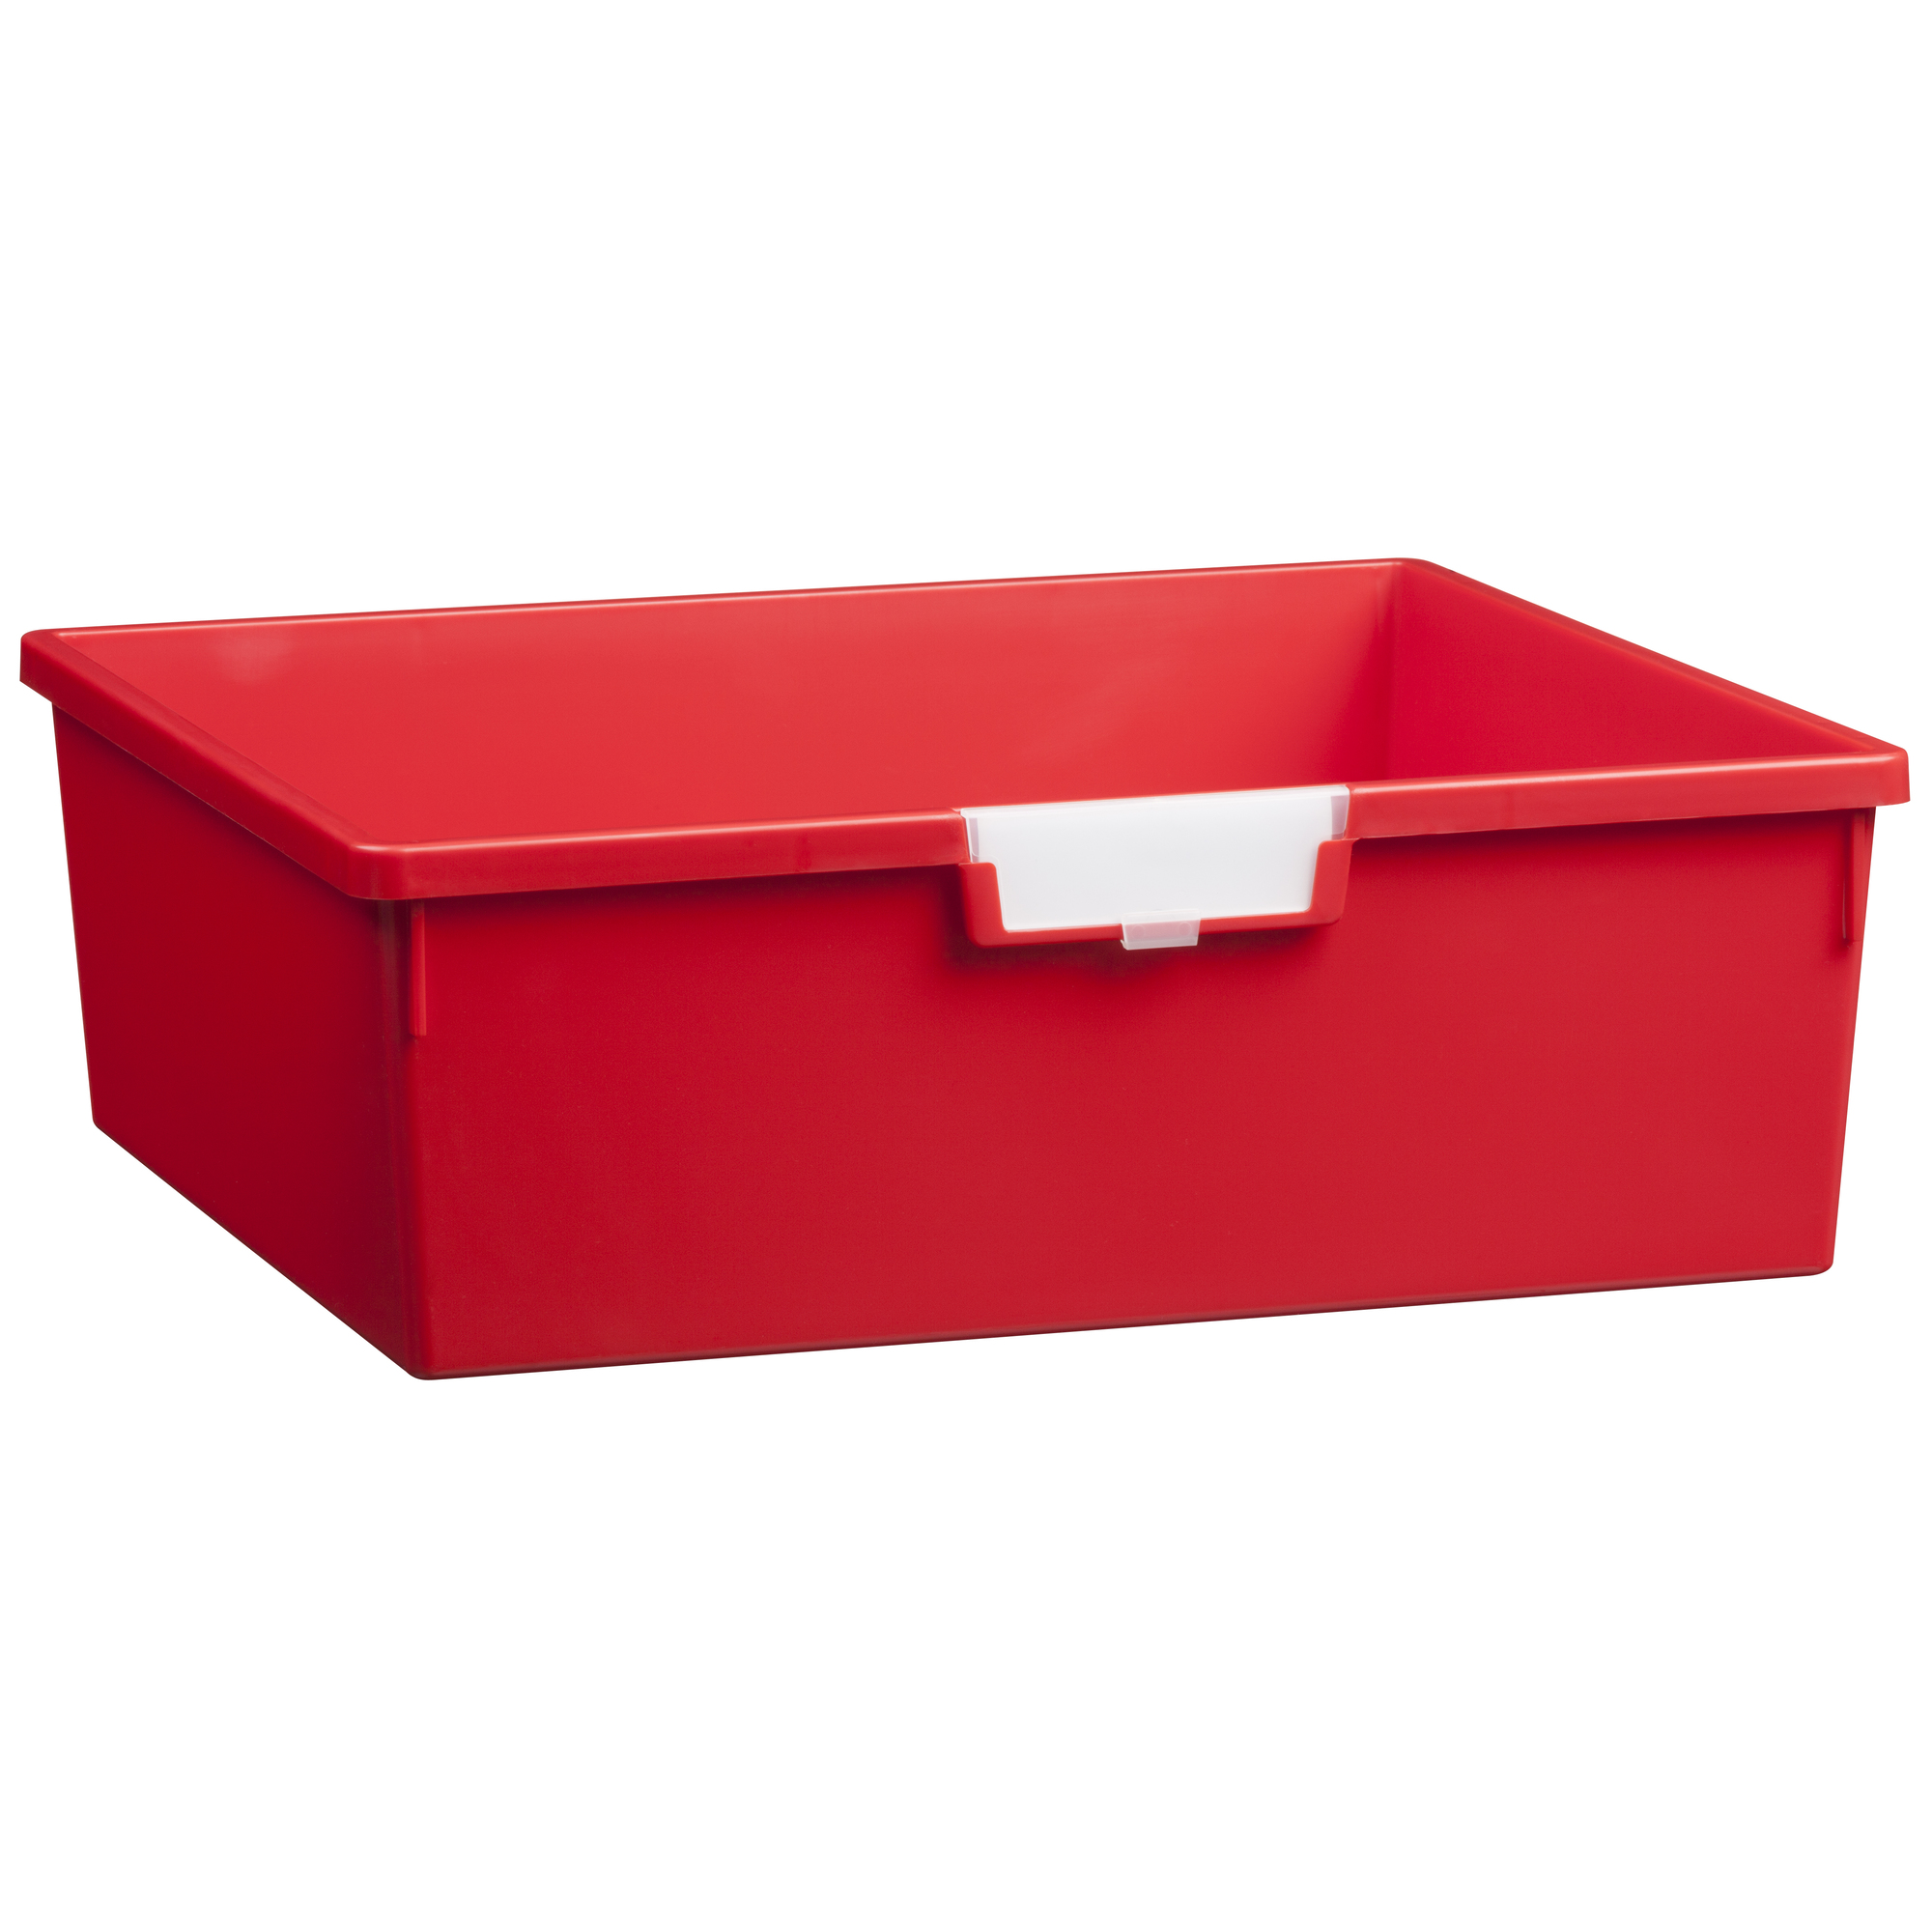 Certwood StorWerks, Wide Line 6Inch Tray in Primary Red-3PK, Included (qty.) 3, Material Plastic, Height 6 in, Model CE1958PR3